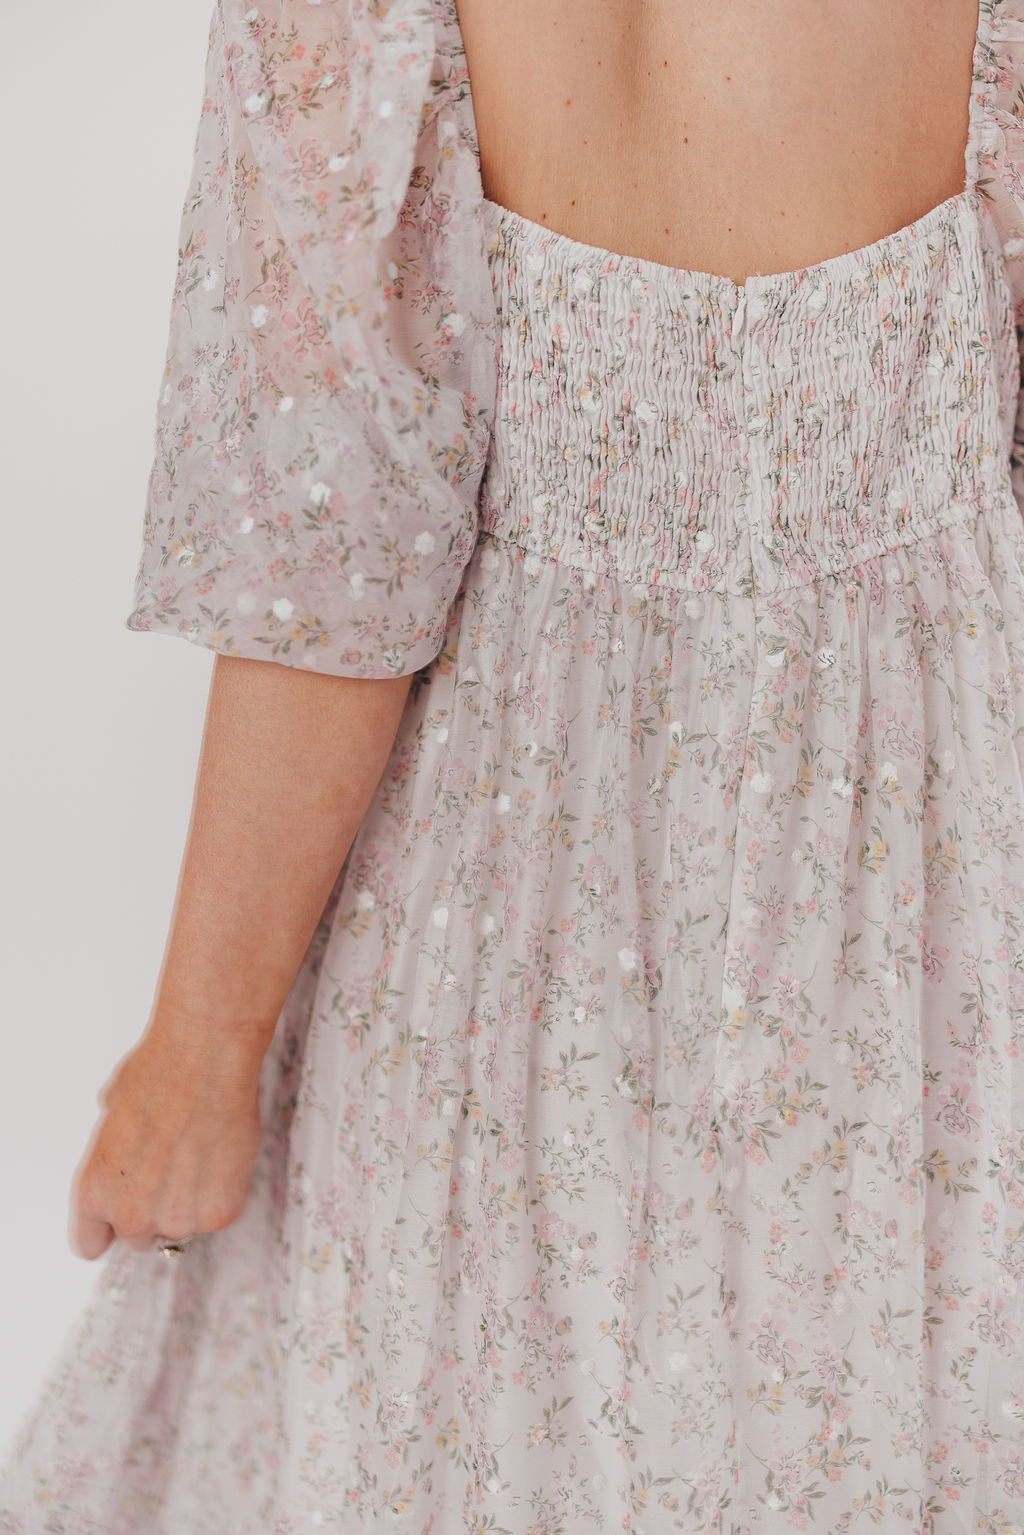 *New* Mona Maxi Dress with Smocking in Grey Floral - Bump Friendly (S-3XL)